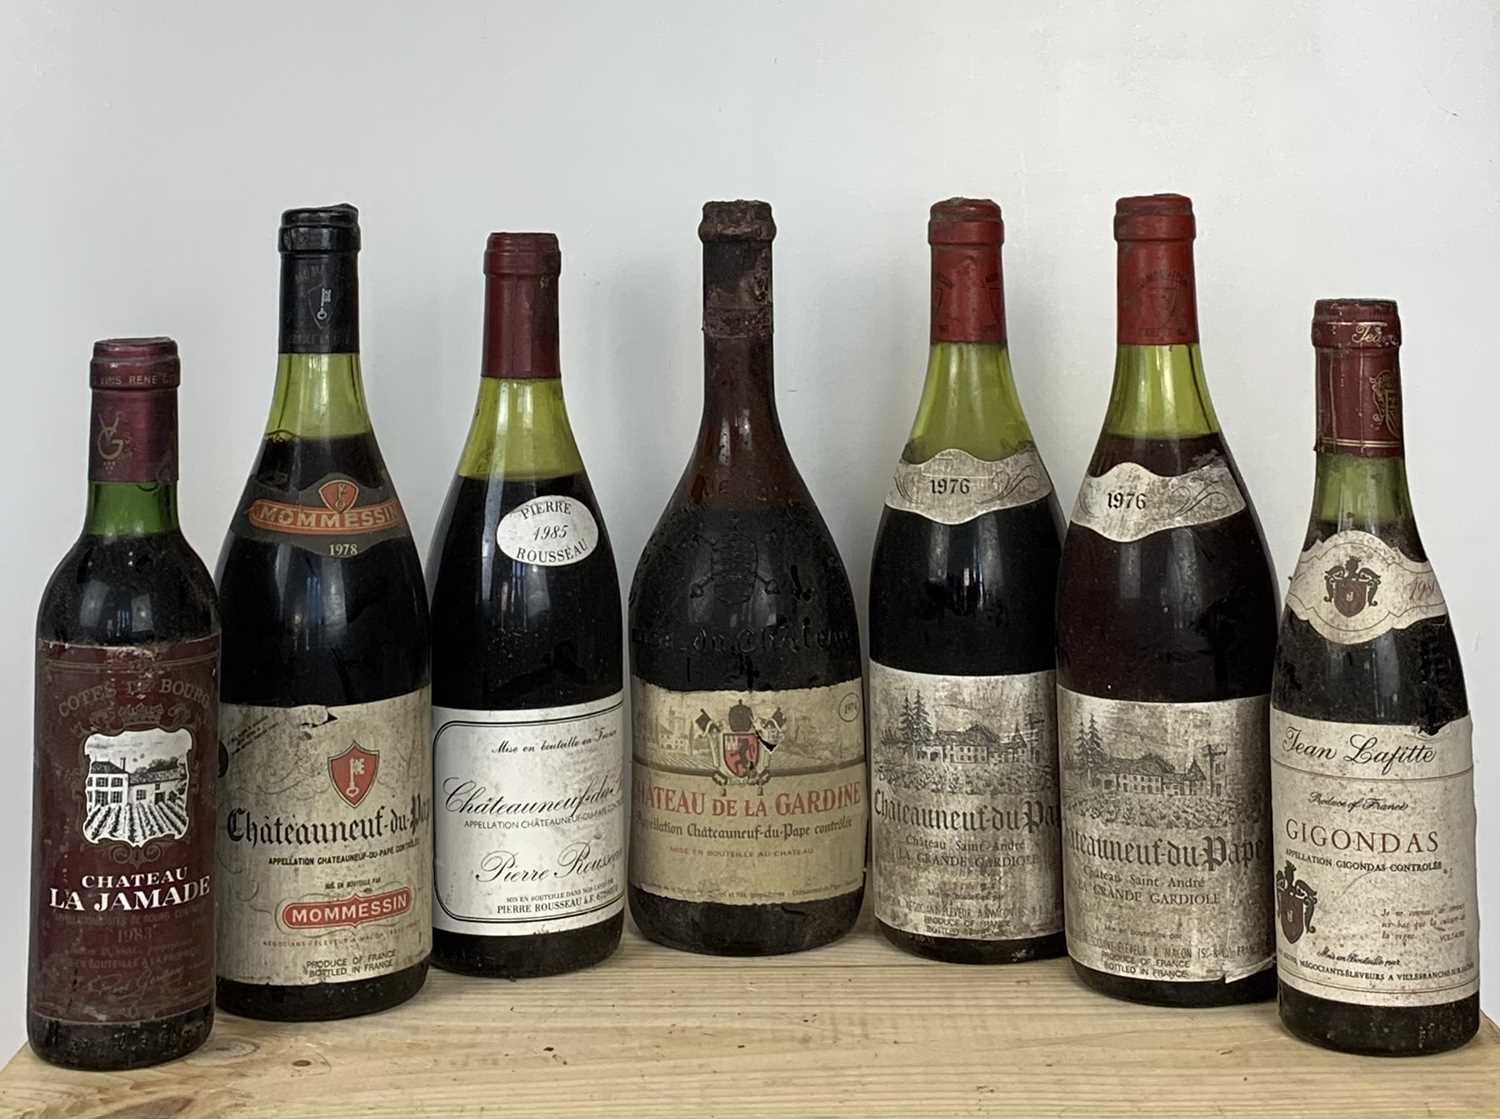 Lot 18 - 7 Bottles (including 2 half bottles) Mixed Lot Southern Rhone and Bordeaux